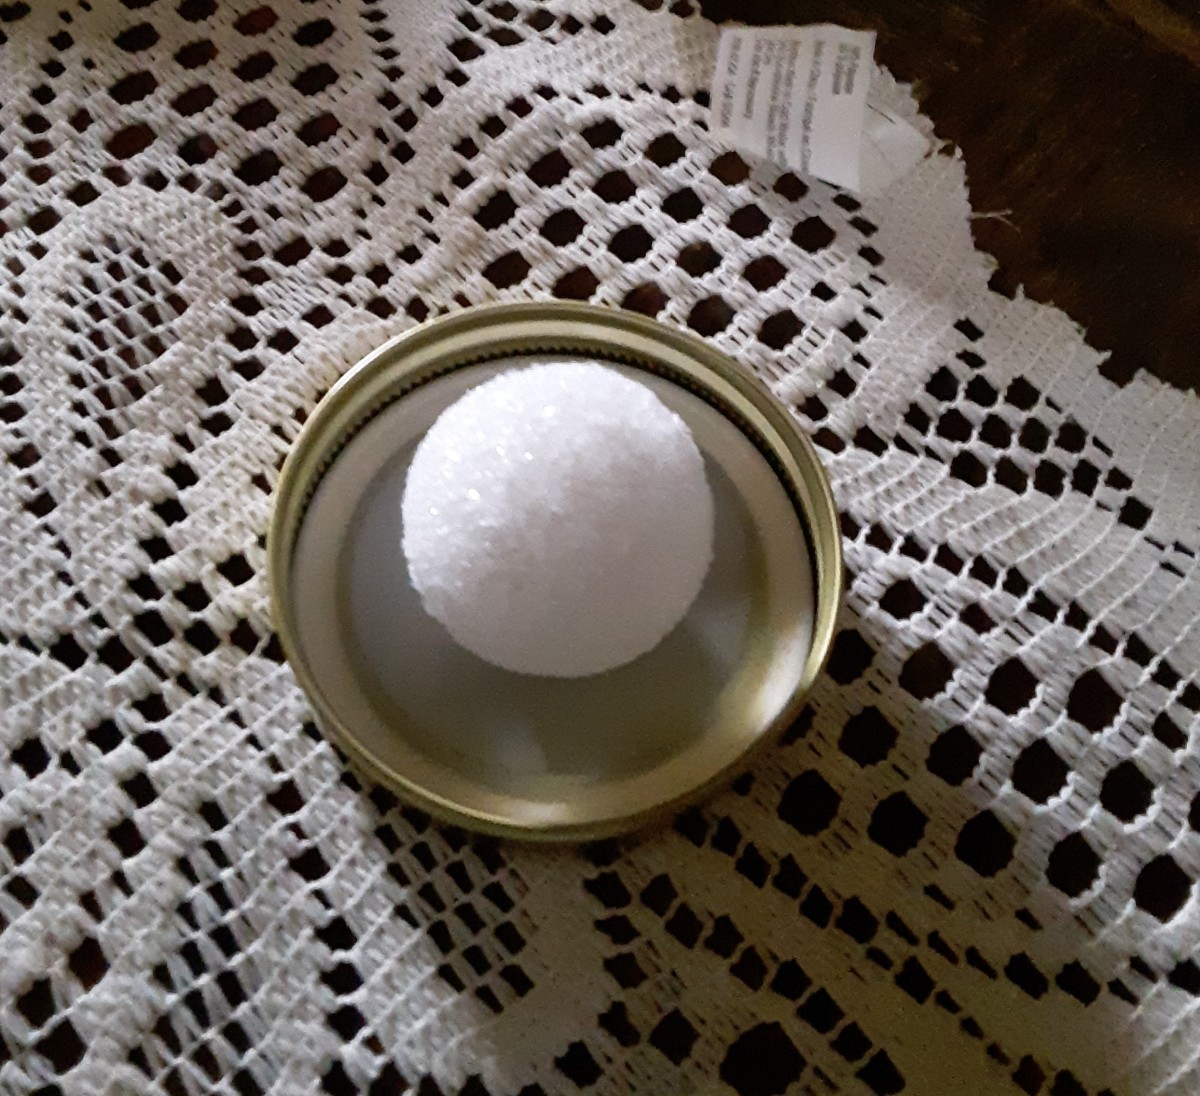 Glue floral foam ball to the inside of the lid.